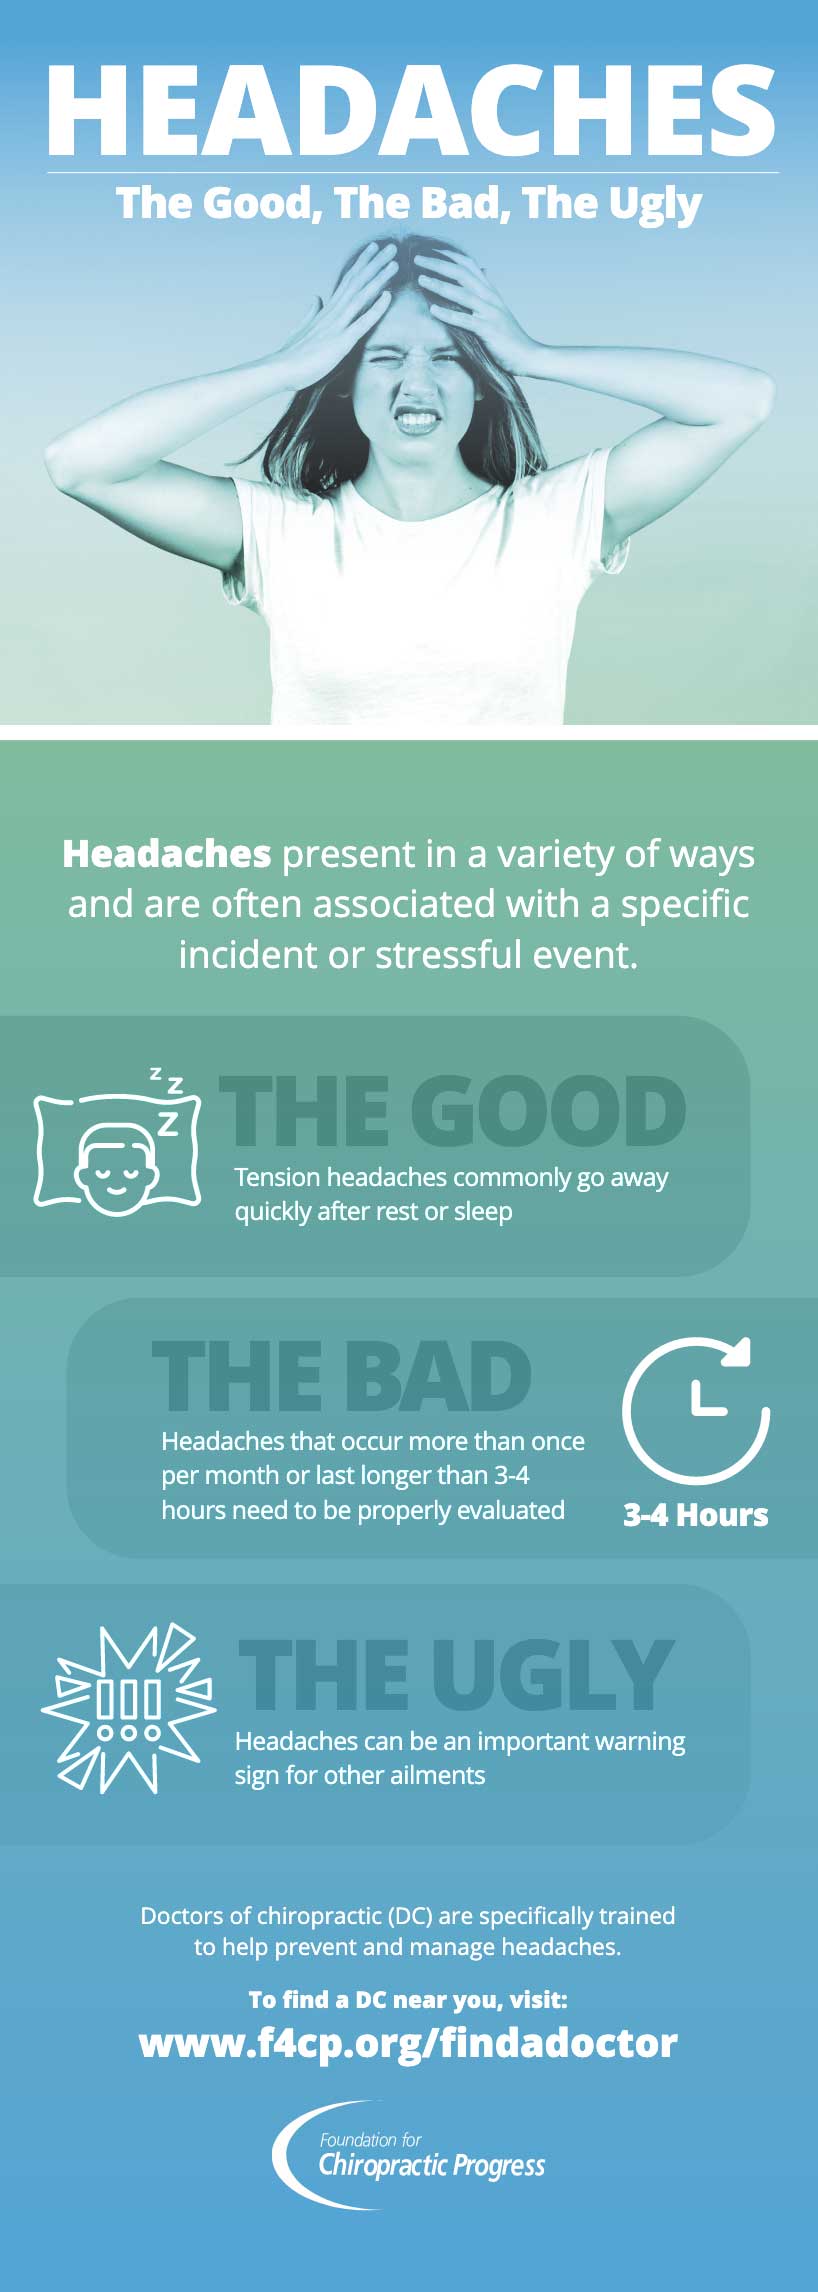 chiropractic doctors manage headaches